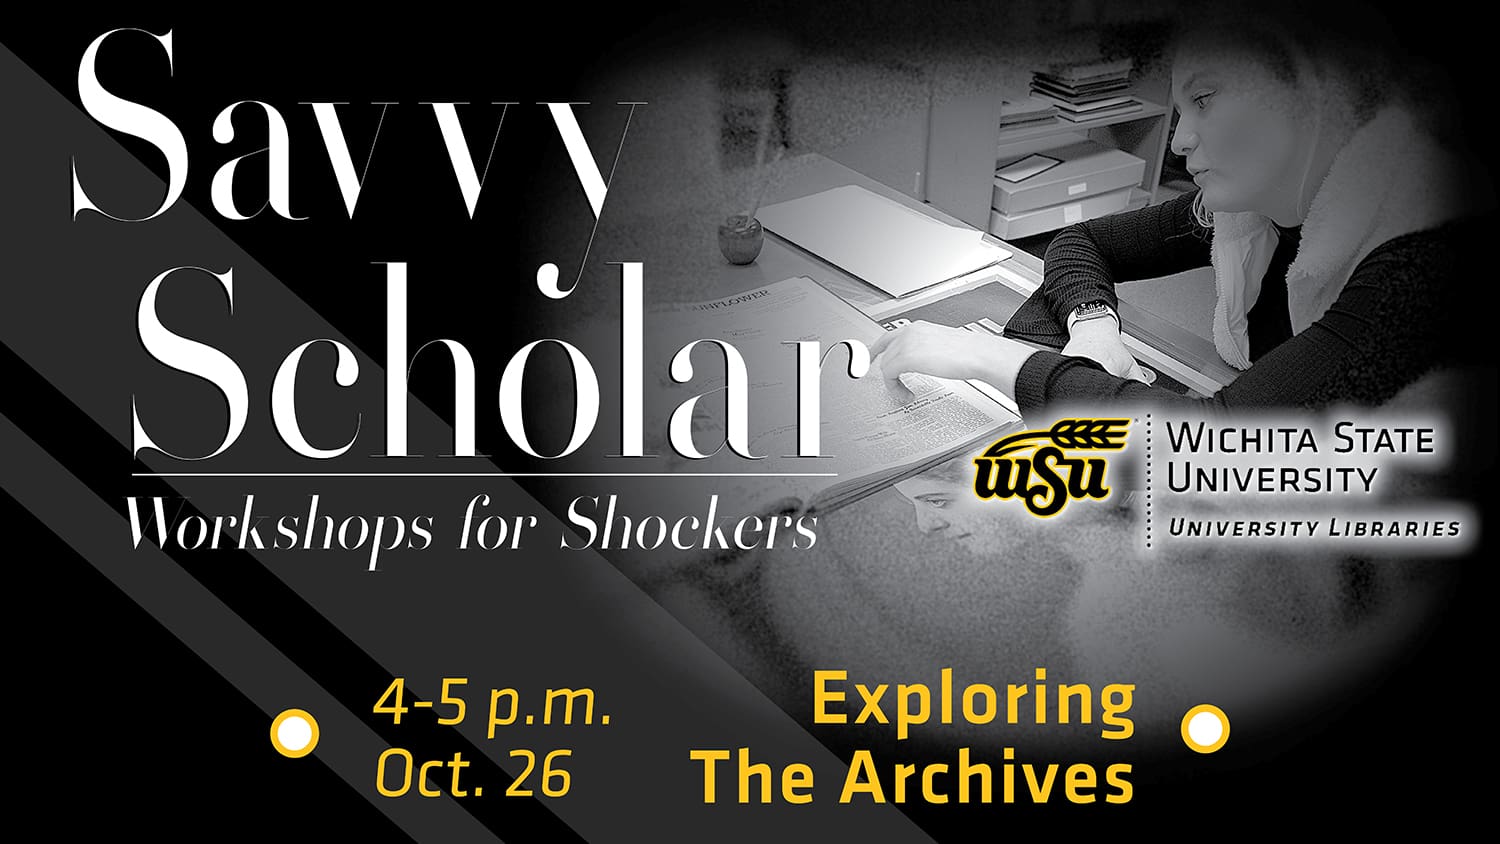 Savvy Scholar Workshops for Shockers. Citation Management Drop-In 4-5 p.m. Oct. 12. C-Space, Ablah Library.